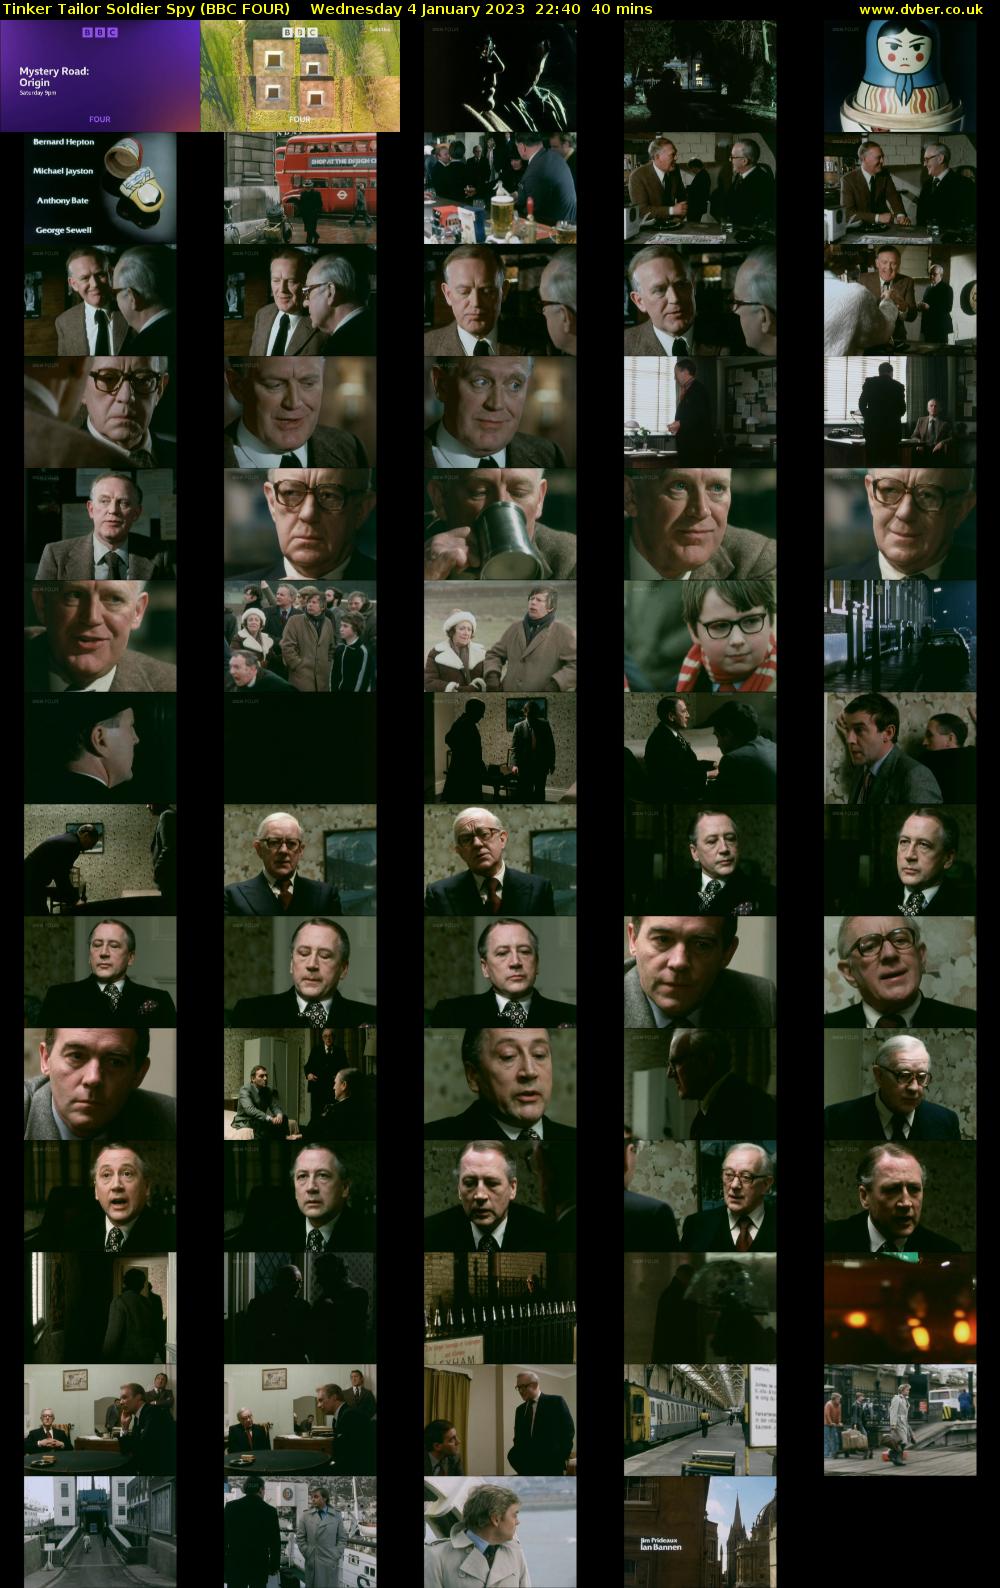 Tinker Tailor Soldier Spy (BBC FOUR) Wednesday 4 January 2023 22:40 - 23:20